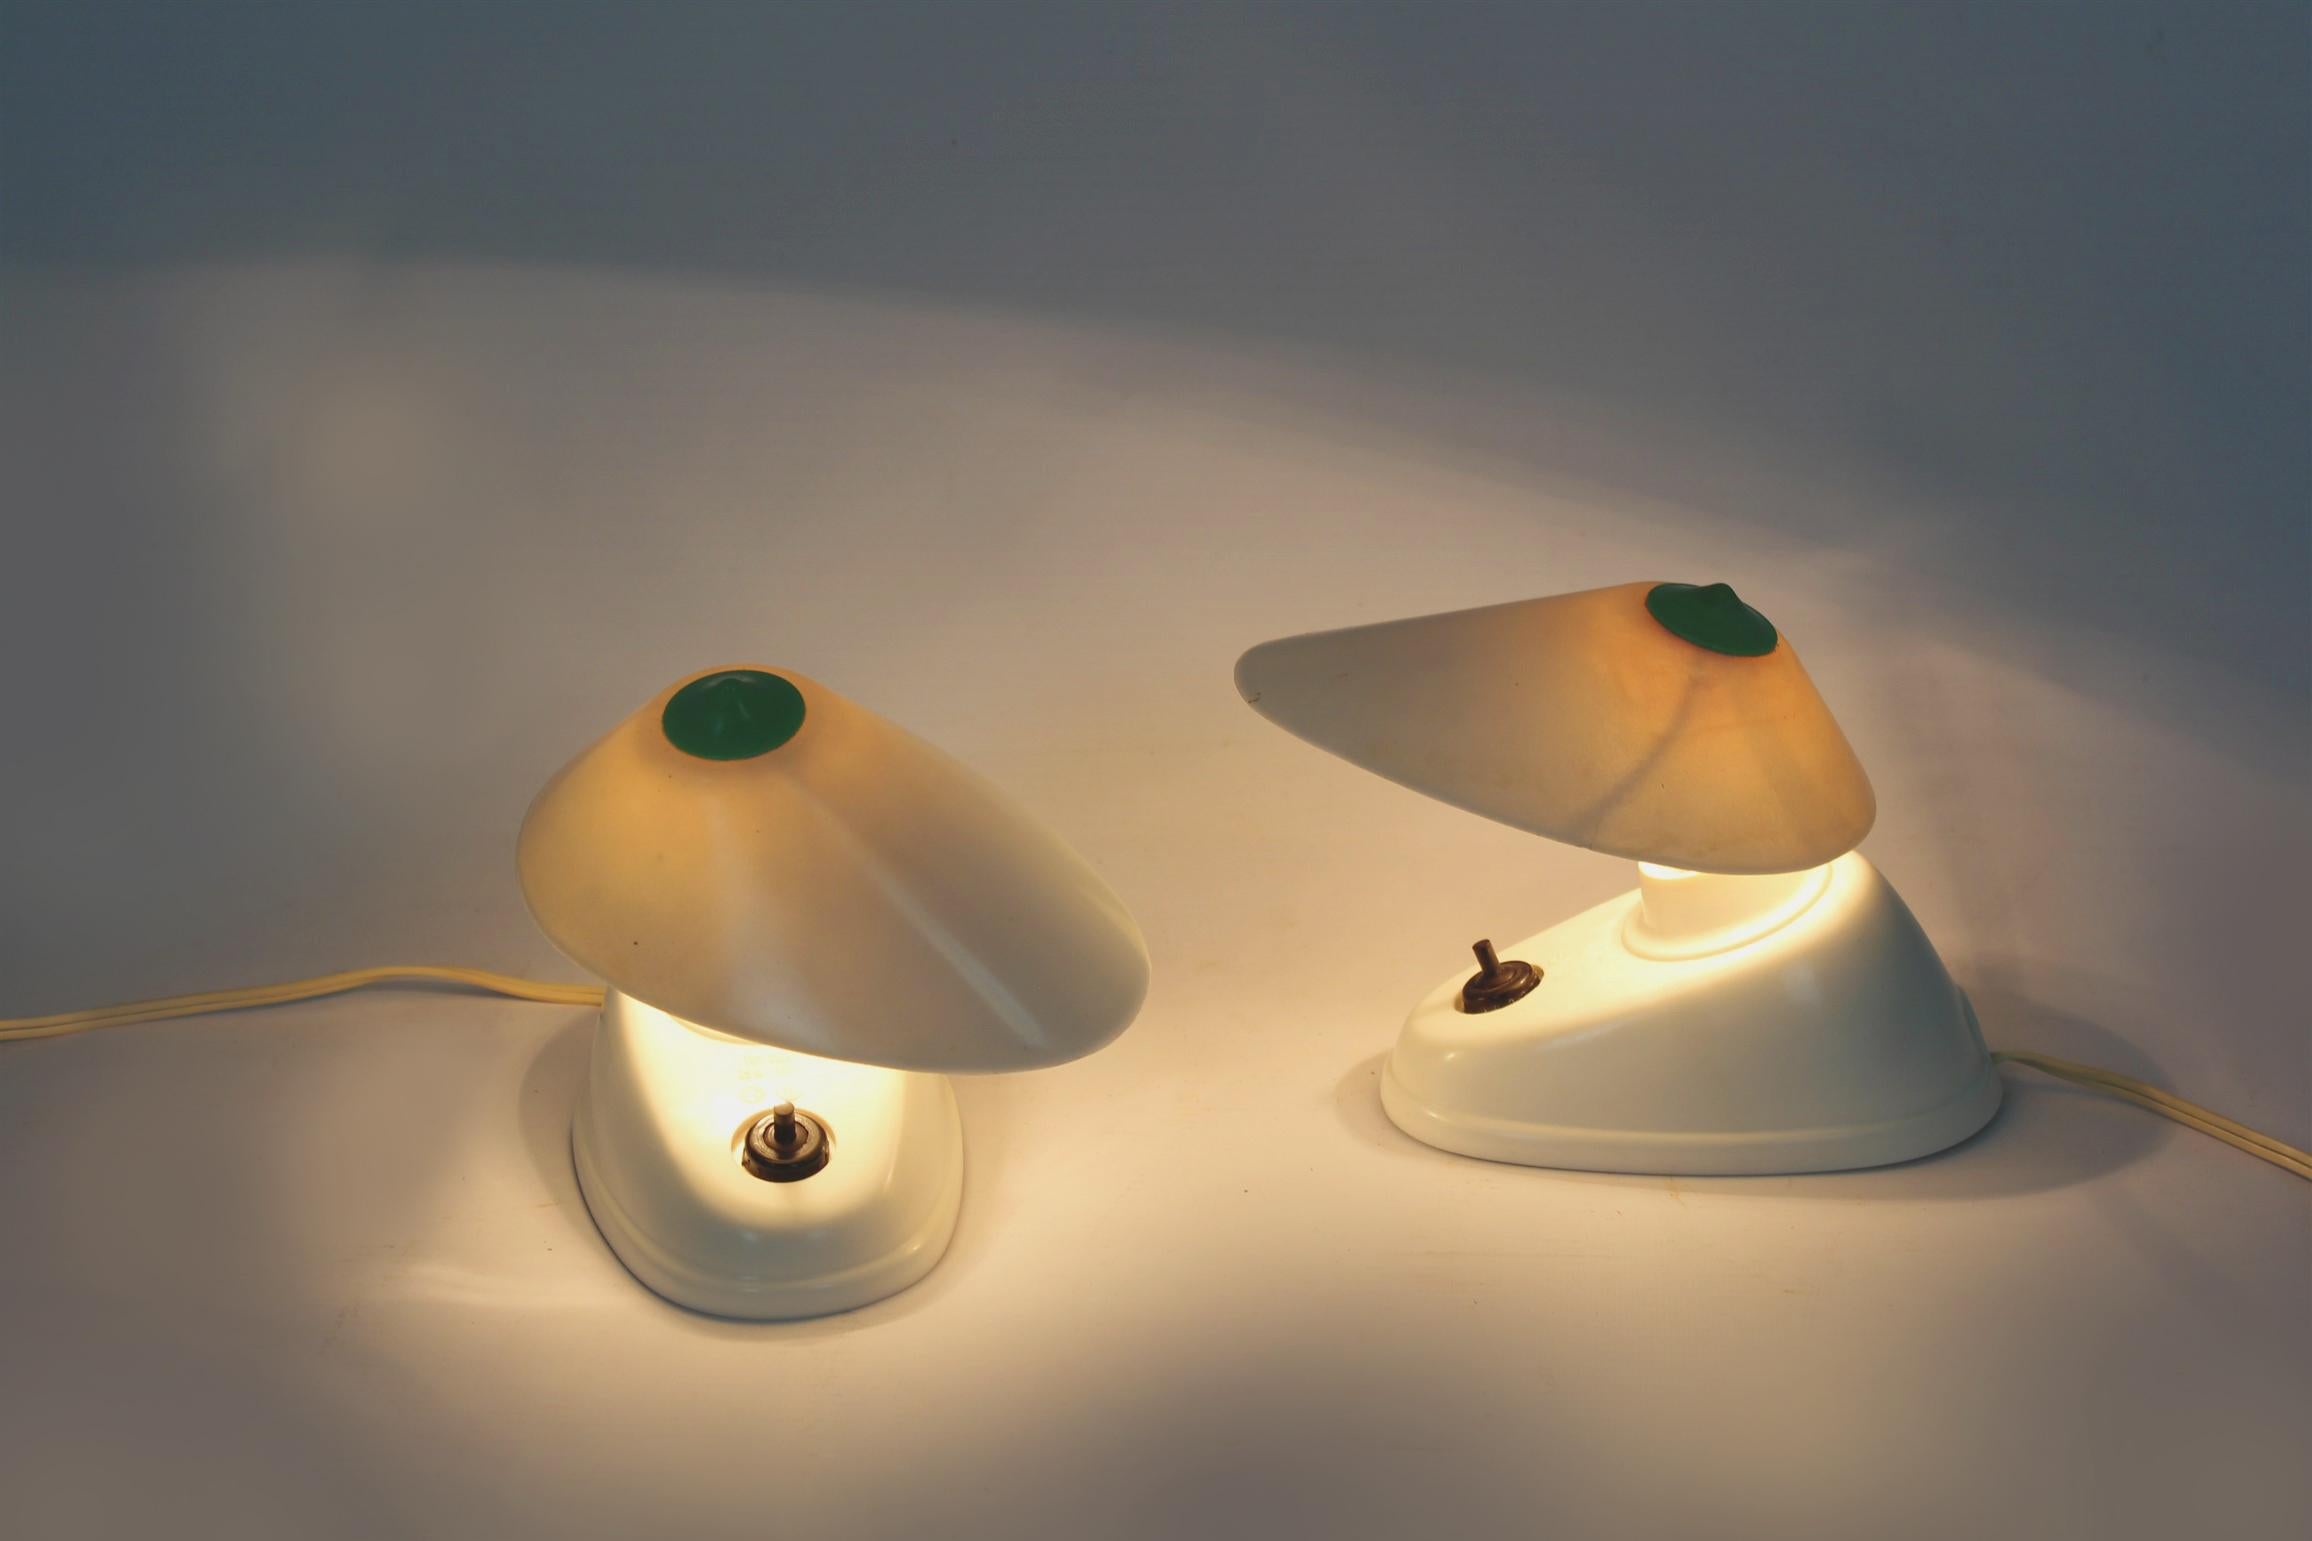 
A set of two bakelite table lamps in the Bauhaus style, produced in Czechoslovakia in the 1940s. Asymmetrical form, adjustable angle of the lampshade. The lamps have a visible model designation (11641) and the manufacturer's logo (ESC).
Preserved